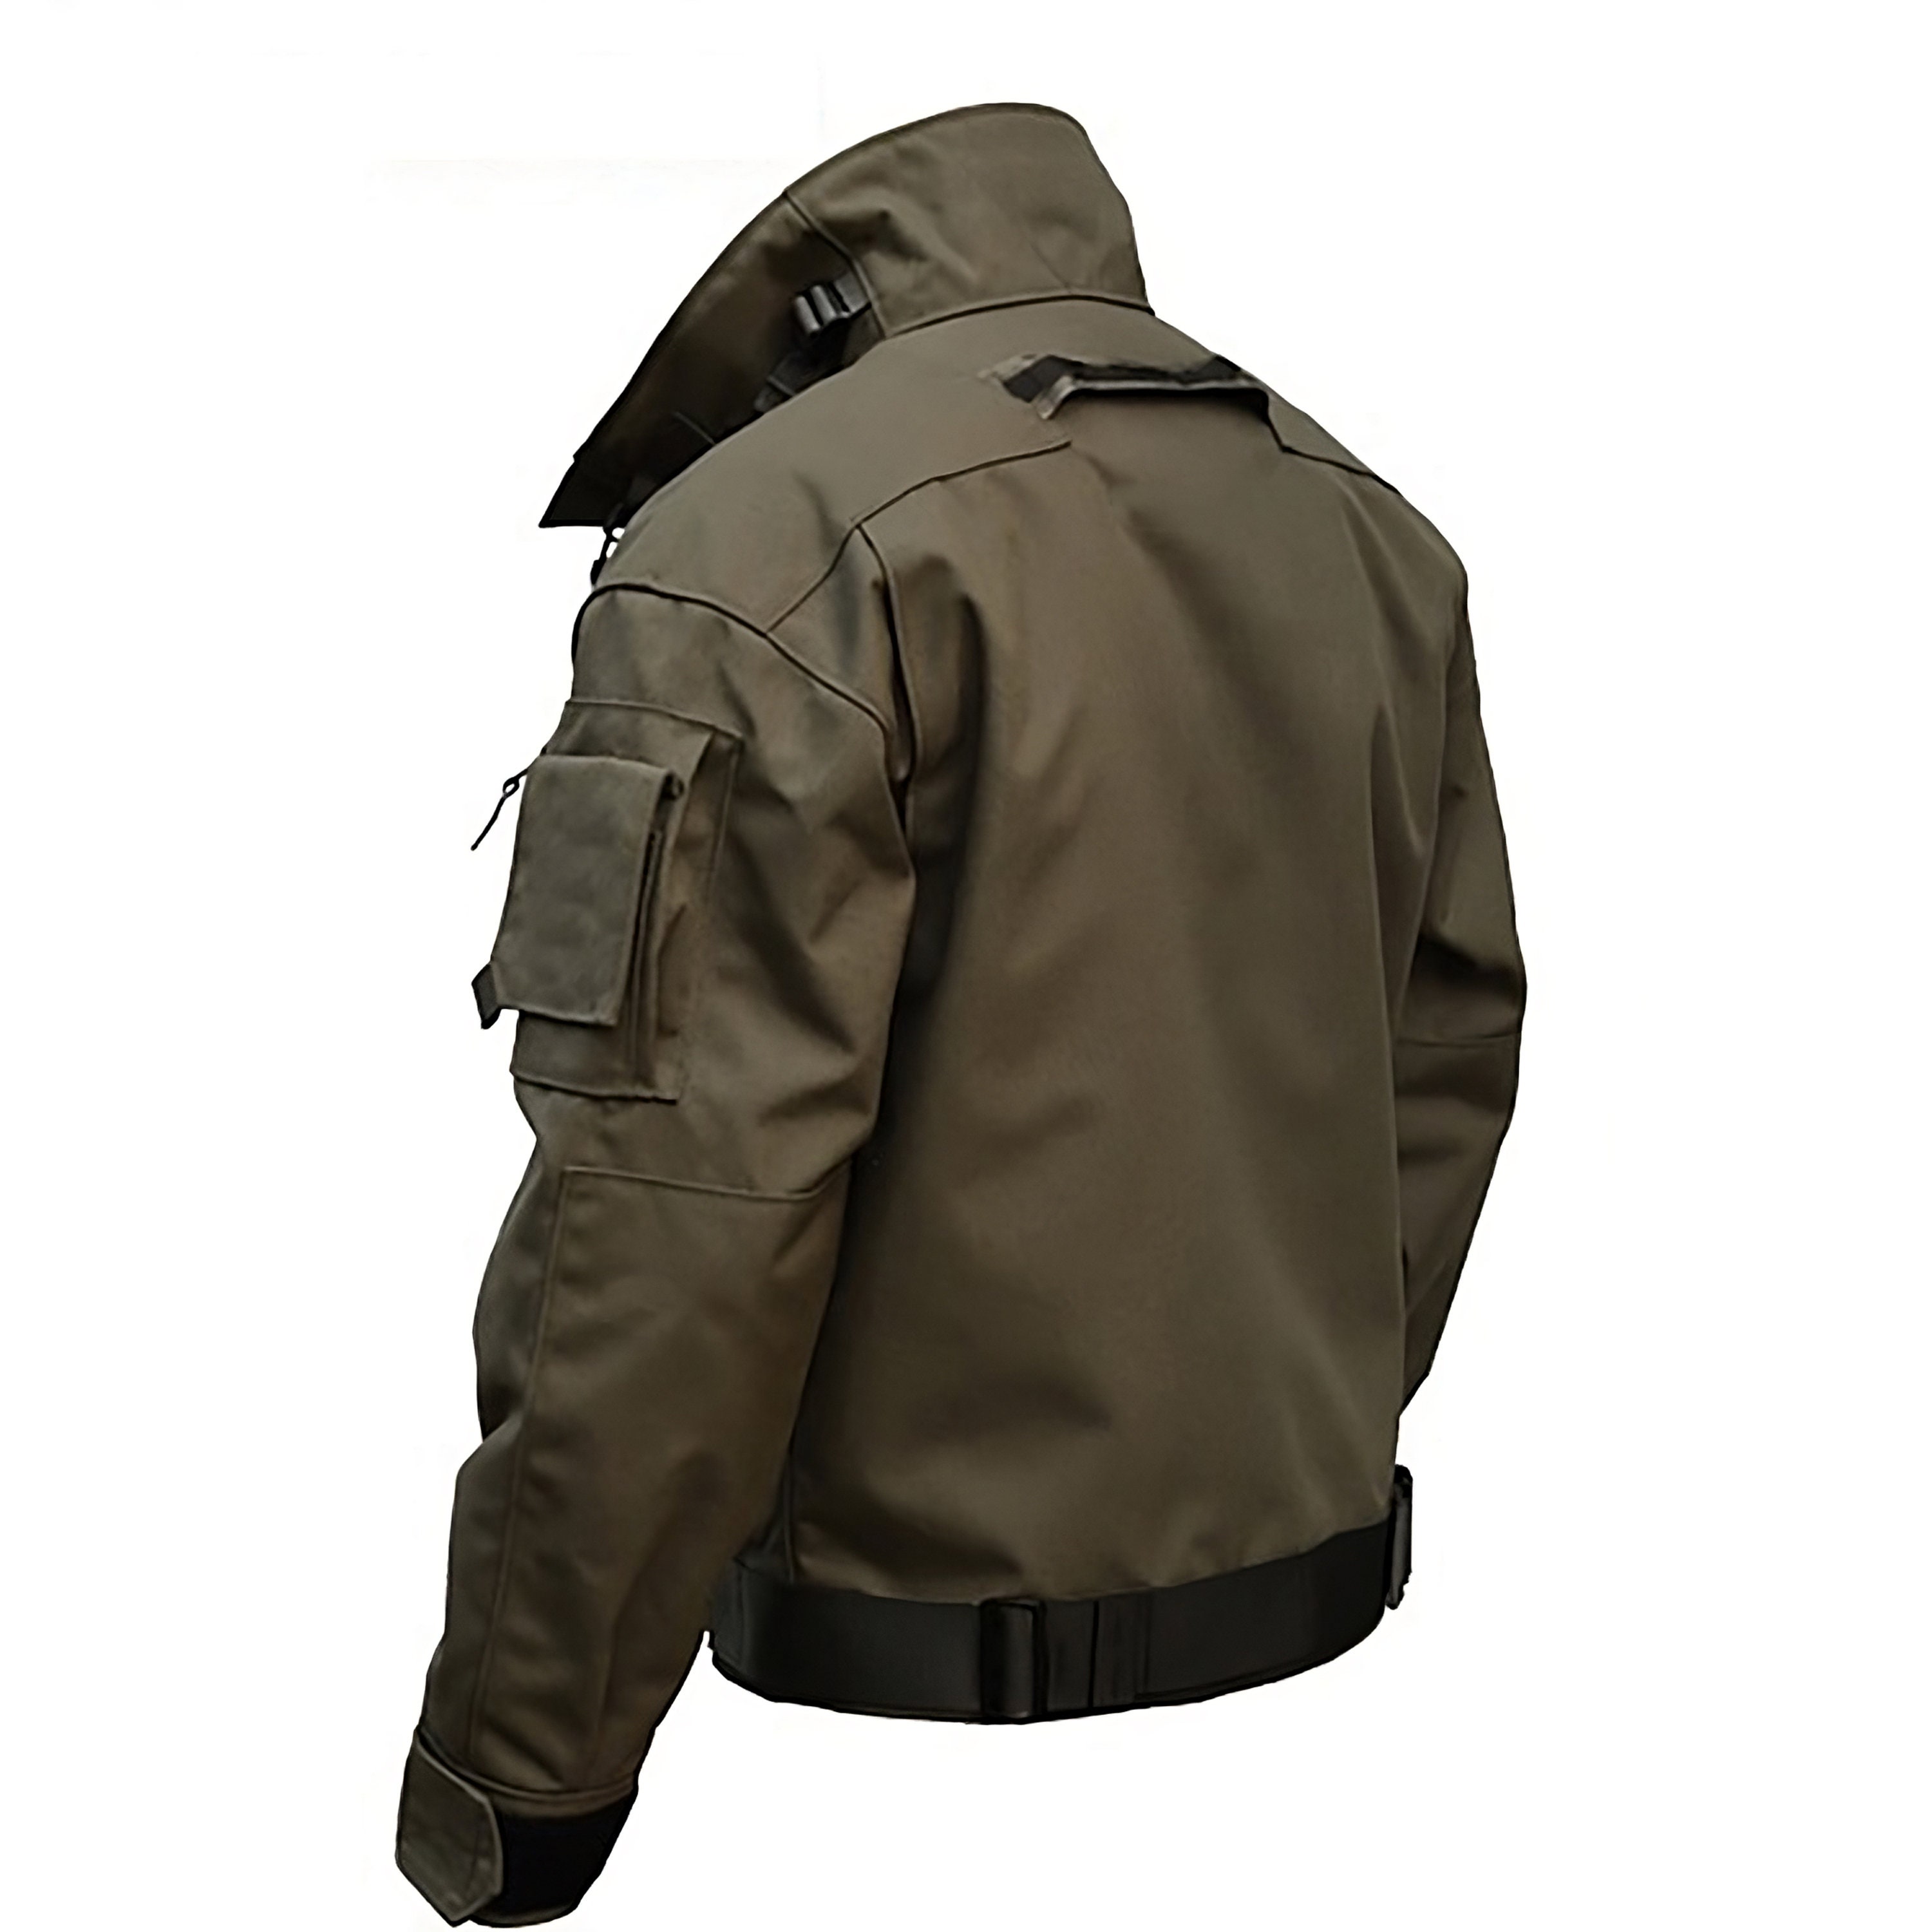 High Quality Military Tactical Jacket Men Waterproof - Etsy